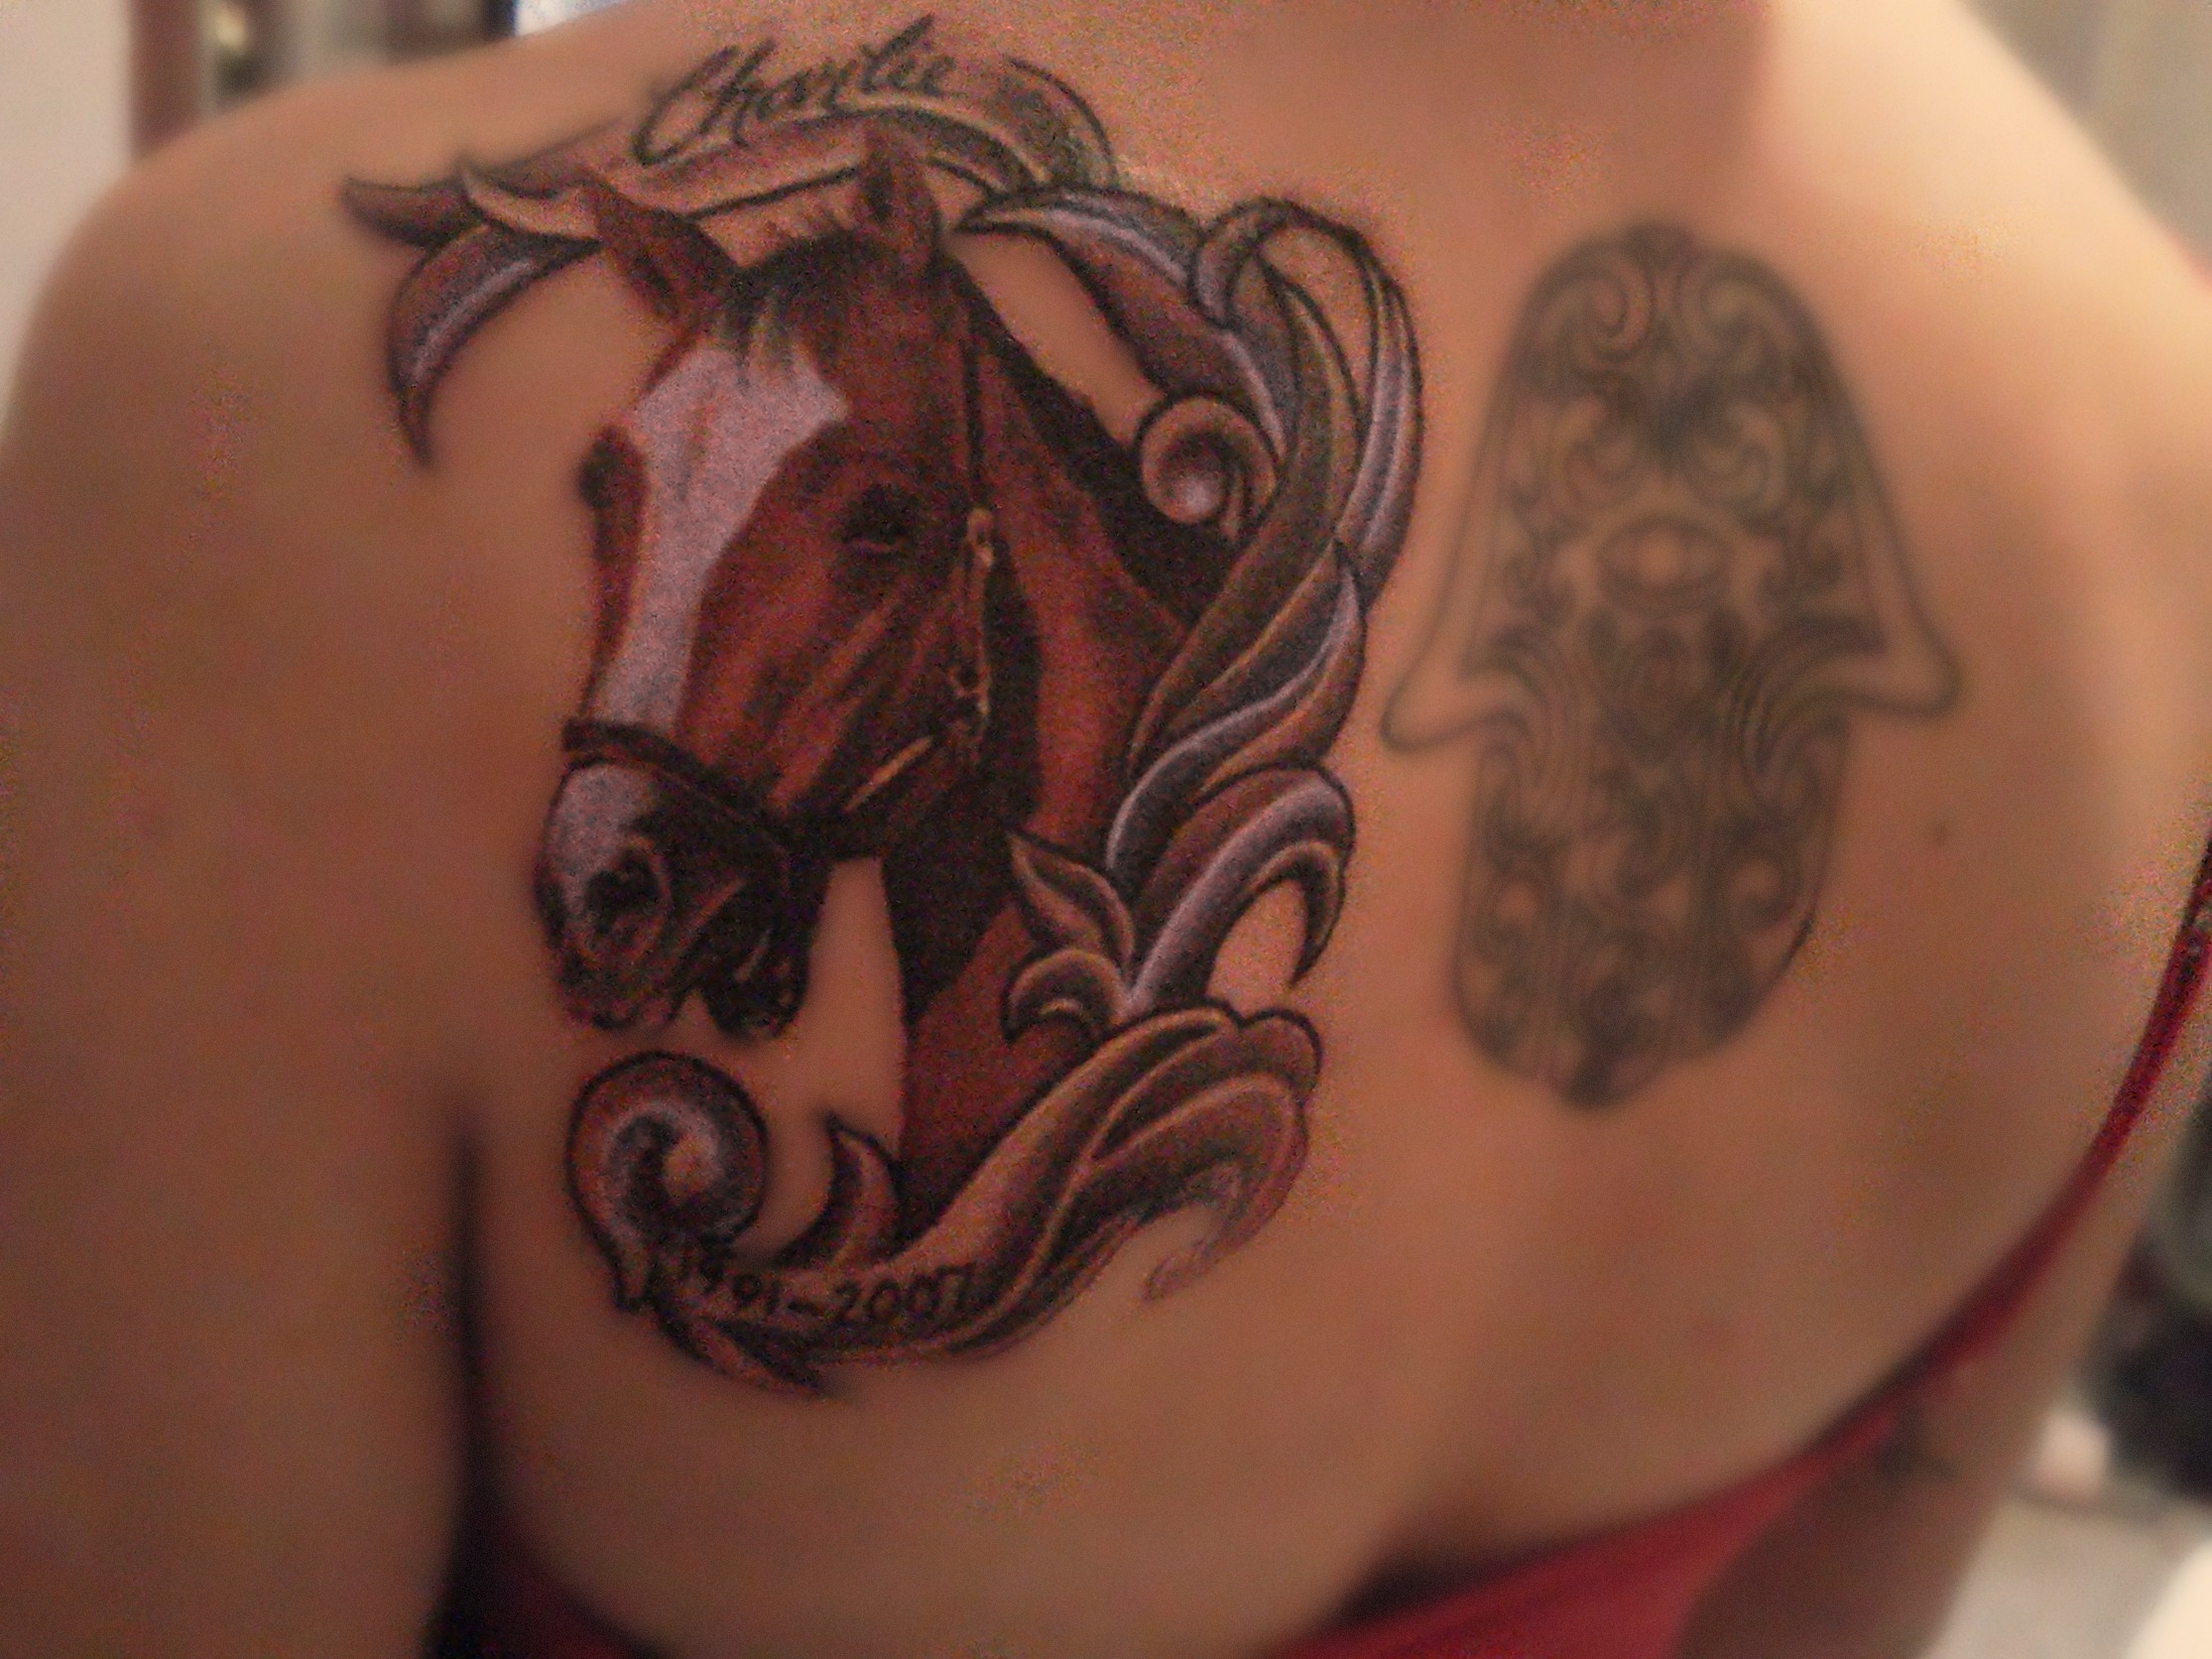 Horse Tattoos Designs, Ideas and Meaning | Tattoos For You